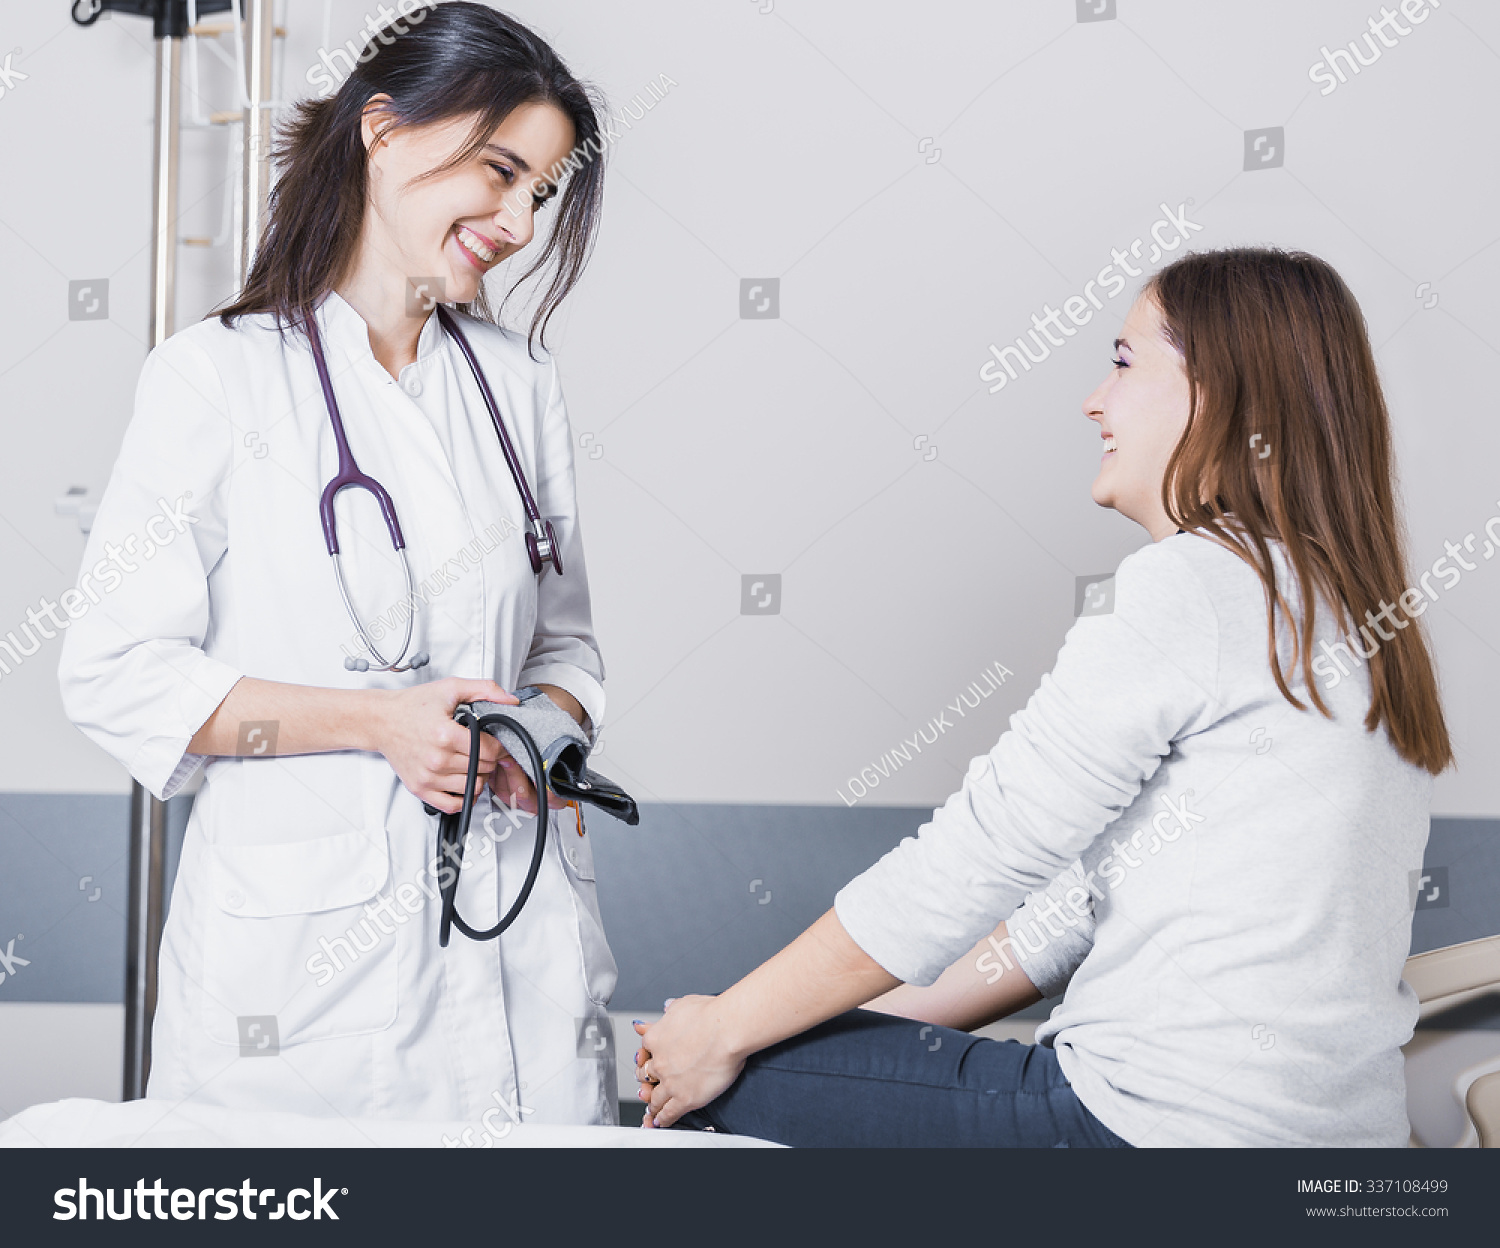 beautiful girl doctor in a white coat checks the blood pressure in the girl on the bed #337108499